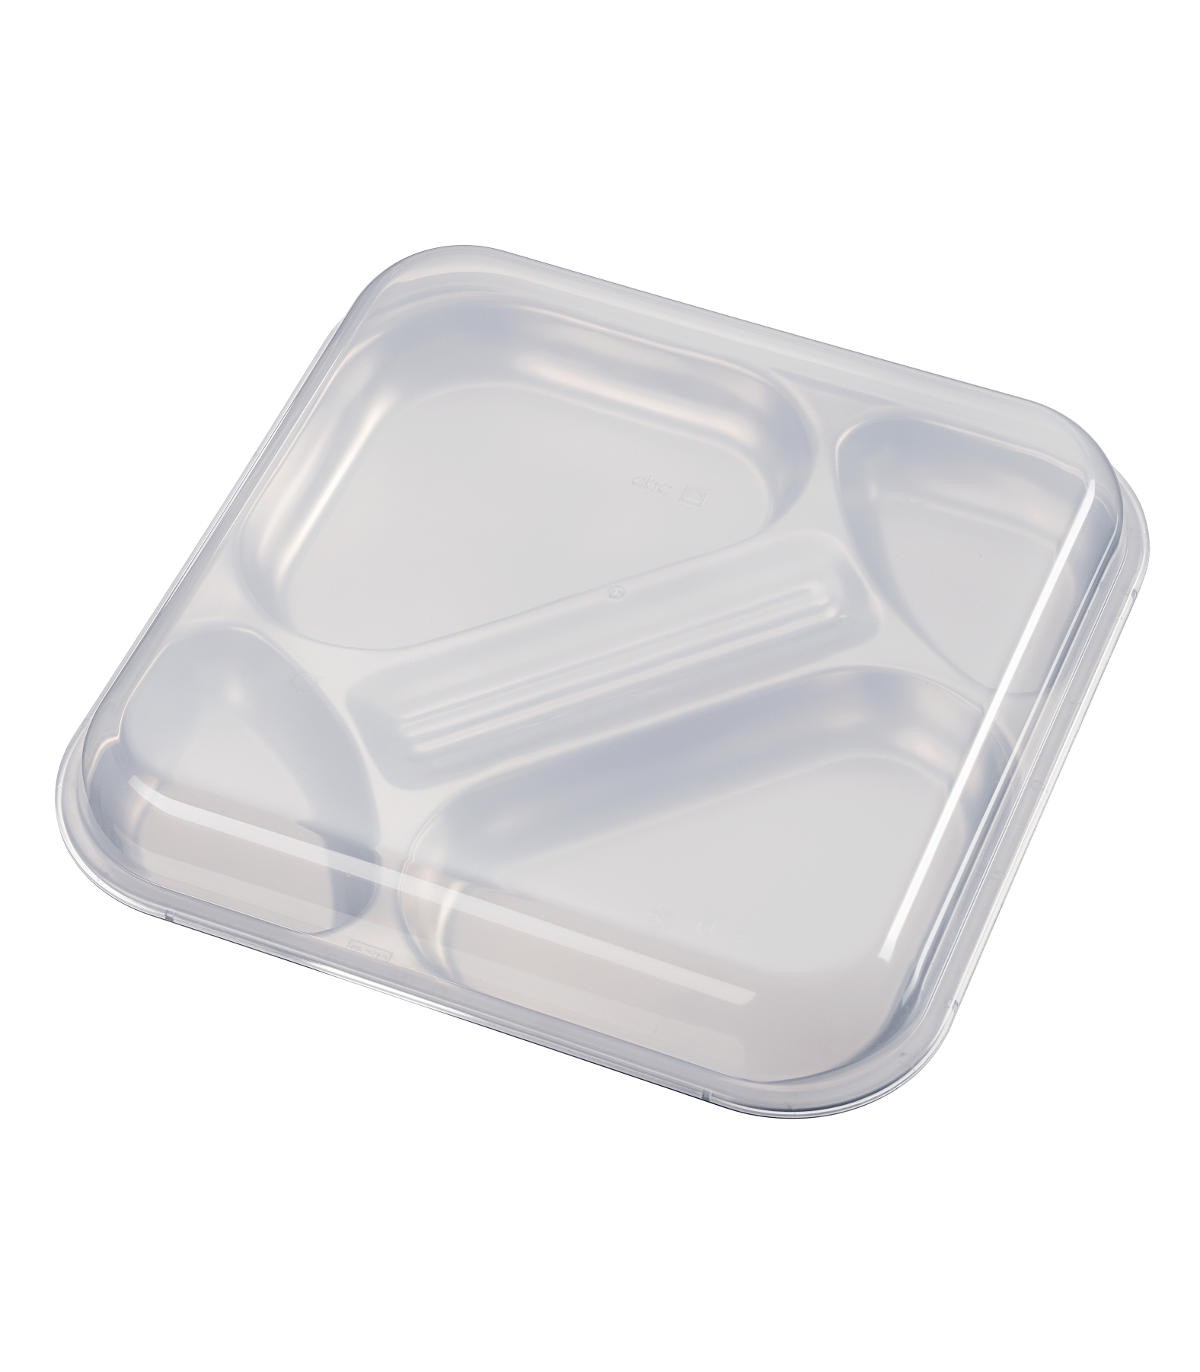 10 compartment meal trays with 10 covers : Stellinox